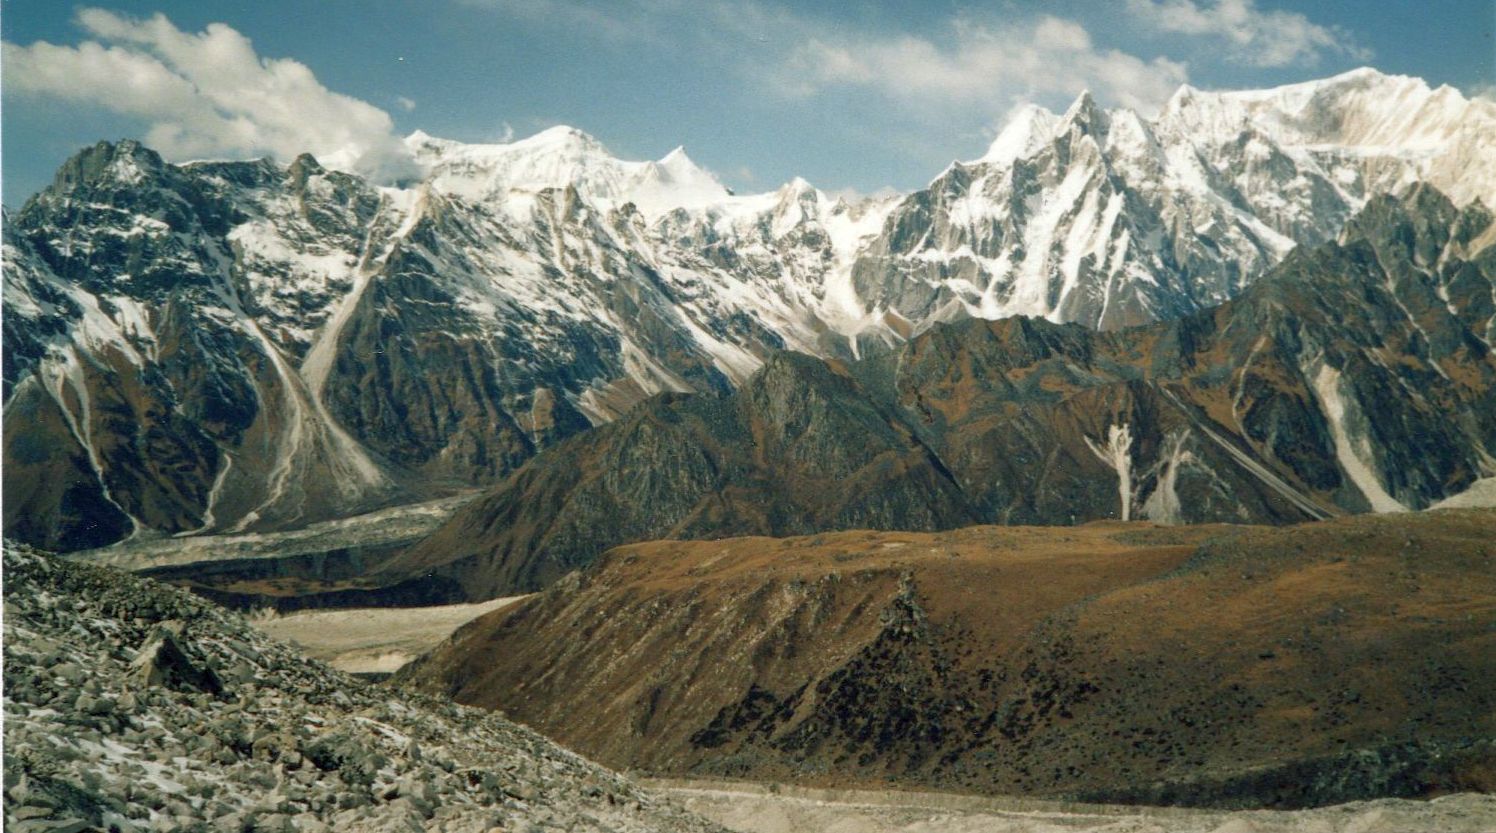 The Peri Himal on descent from Larkya La